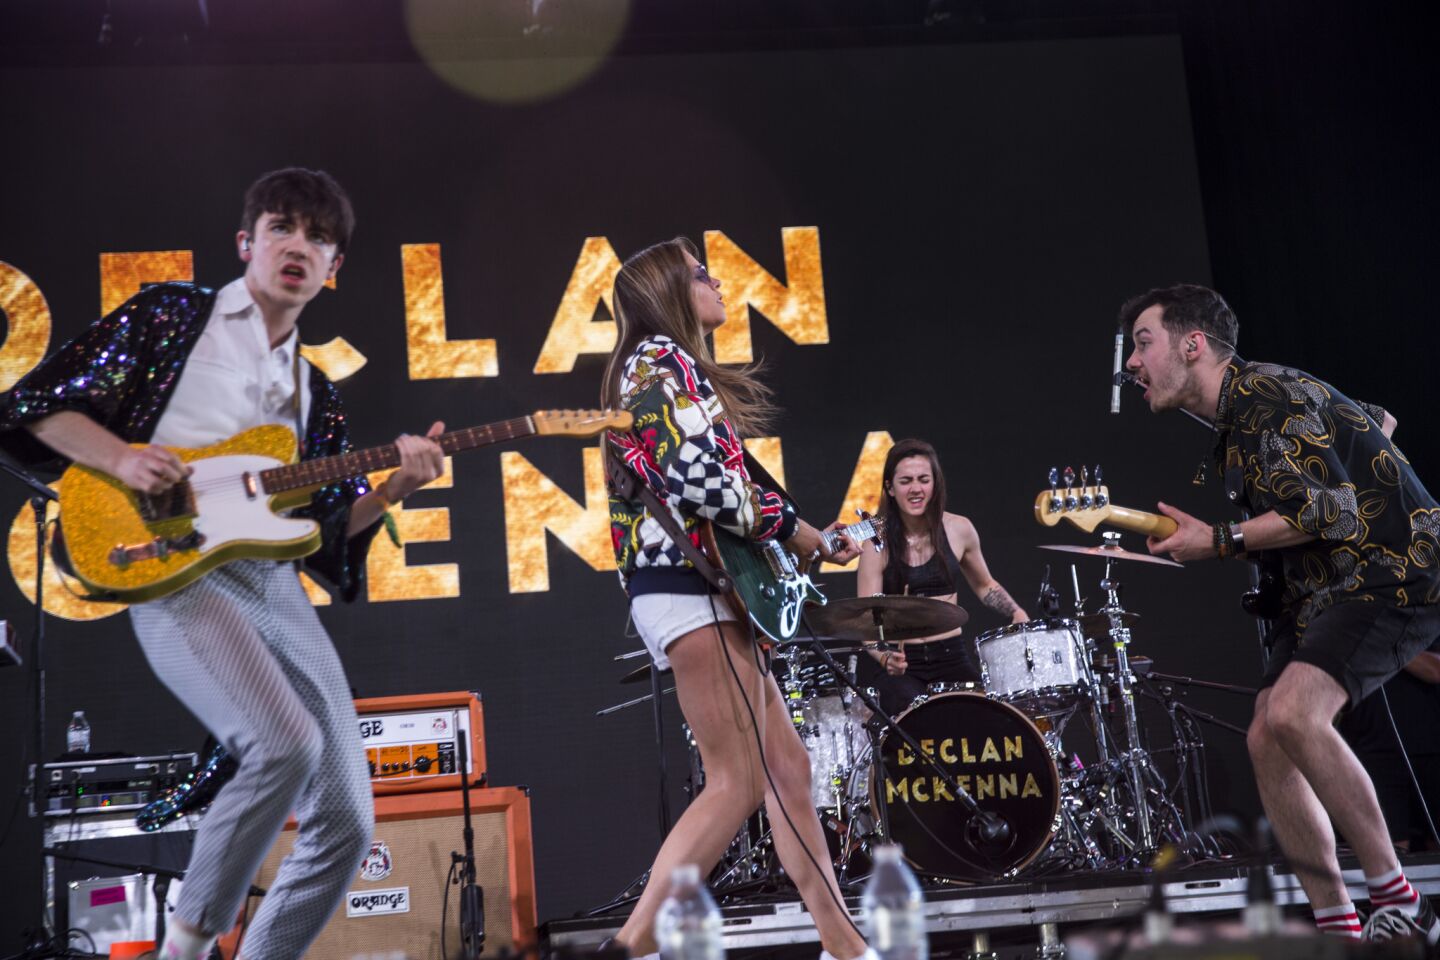 Declan McKenna and band perform during Day 2 of the Coachella Valley Arts and Music Festival on April 14.